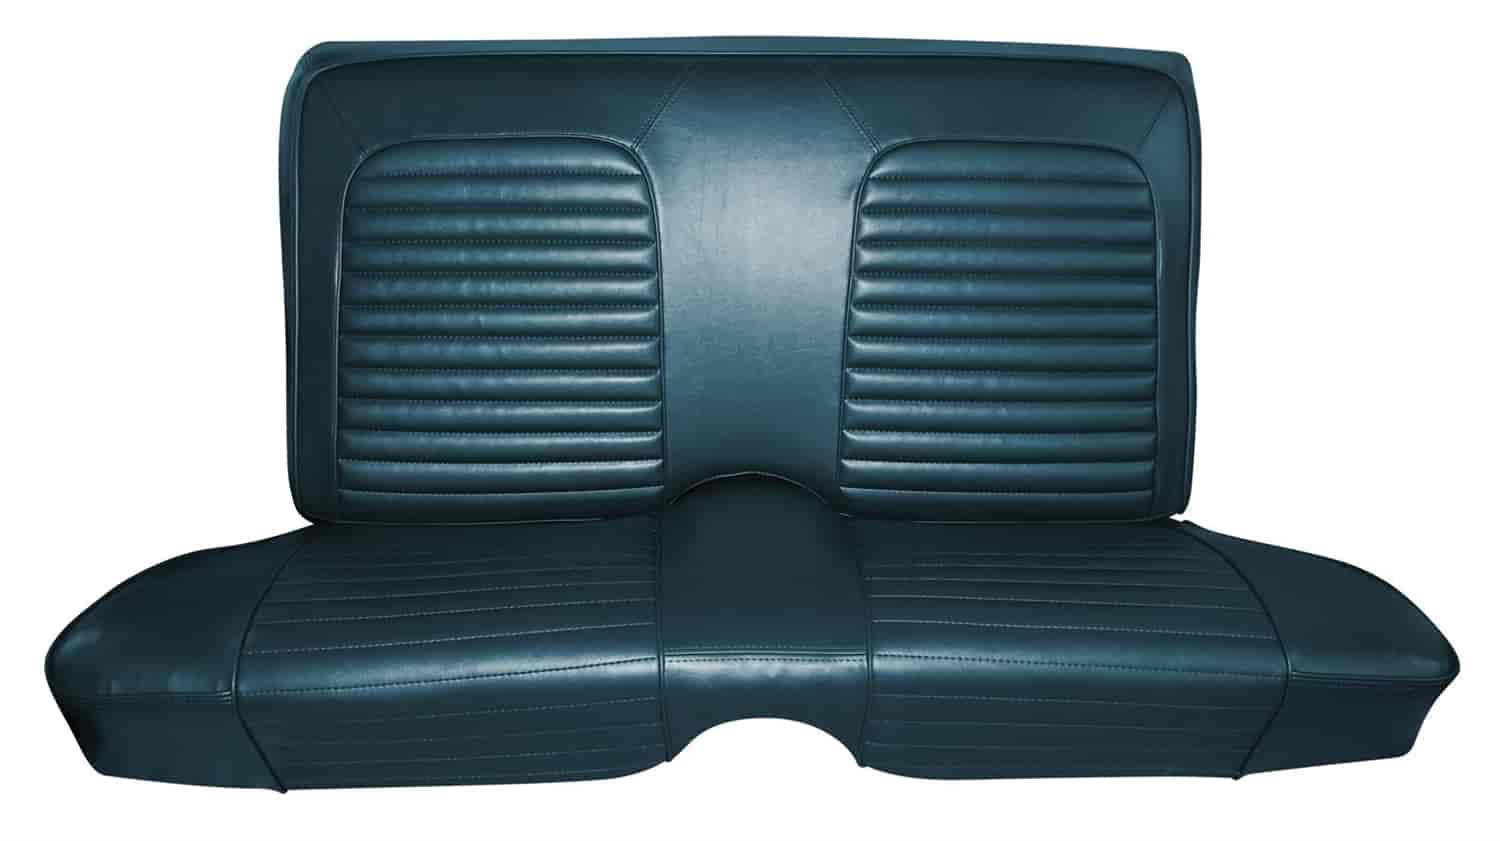 1964 Ford Falcon Futura 4-Door Station Wagon Interior Front and Rear Bench Seat Upholstery Set